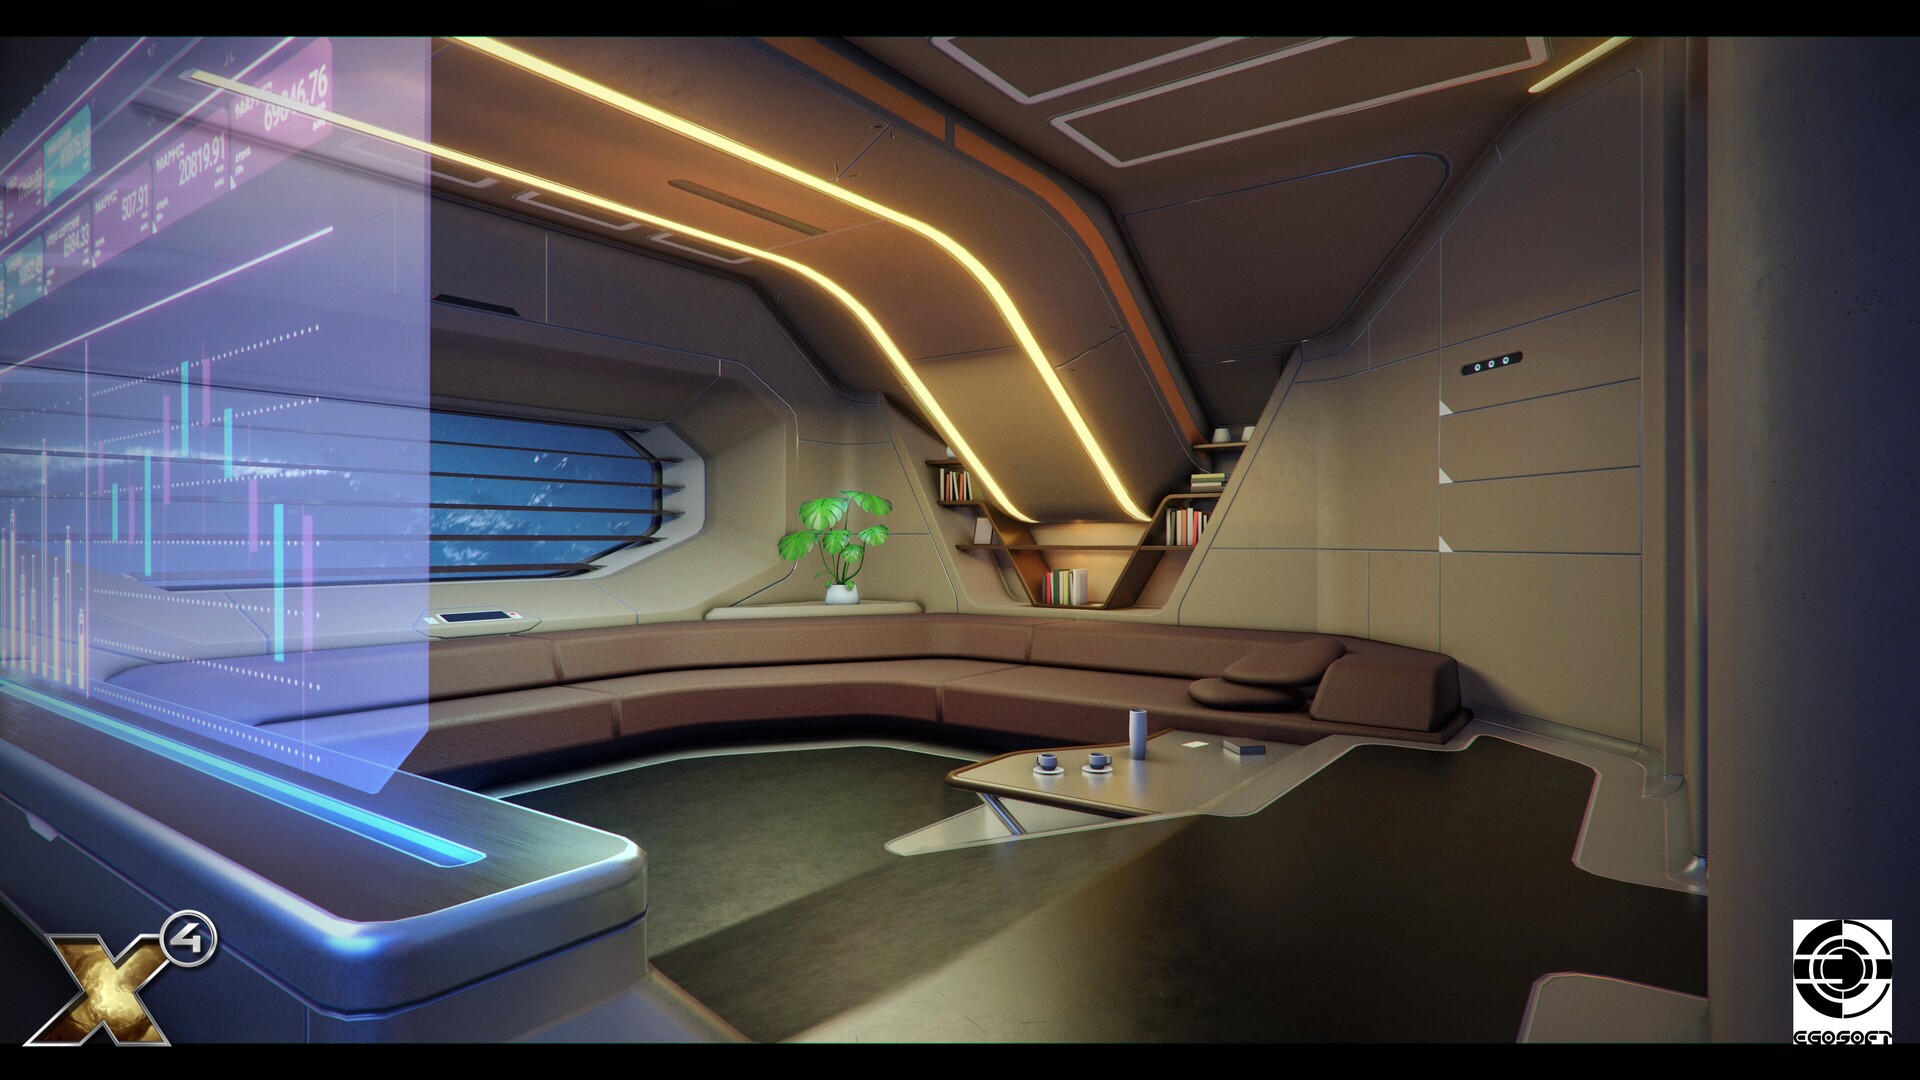 Spaceship Interior With View On The Planet Earth 3D Rendering Stock Photo,  Picture And Royalty Free Image 197226223.